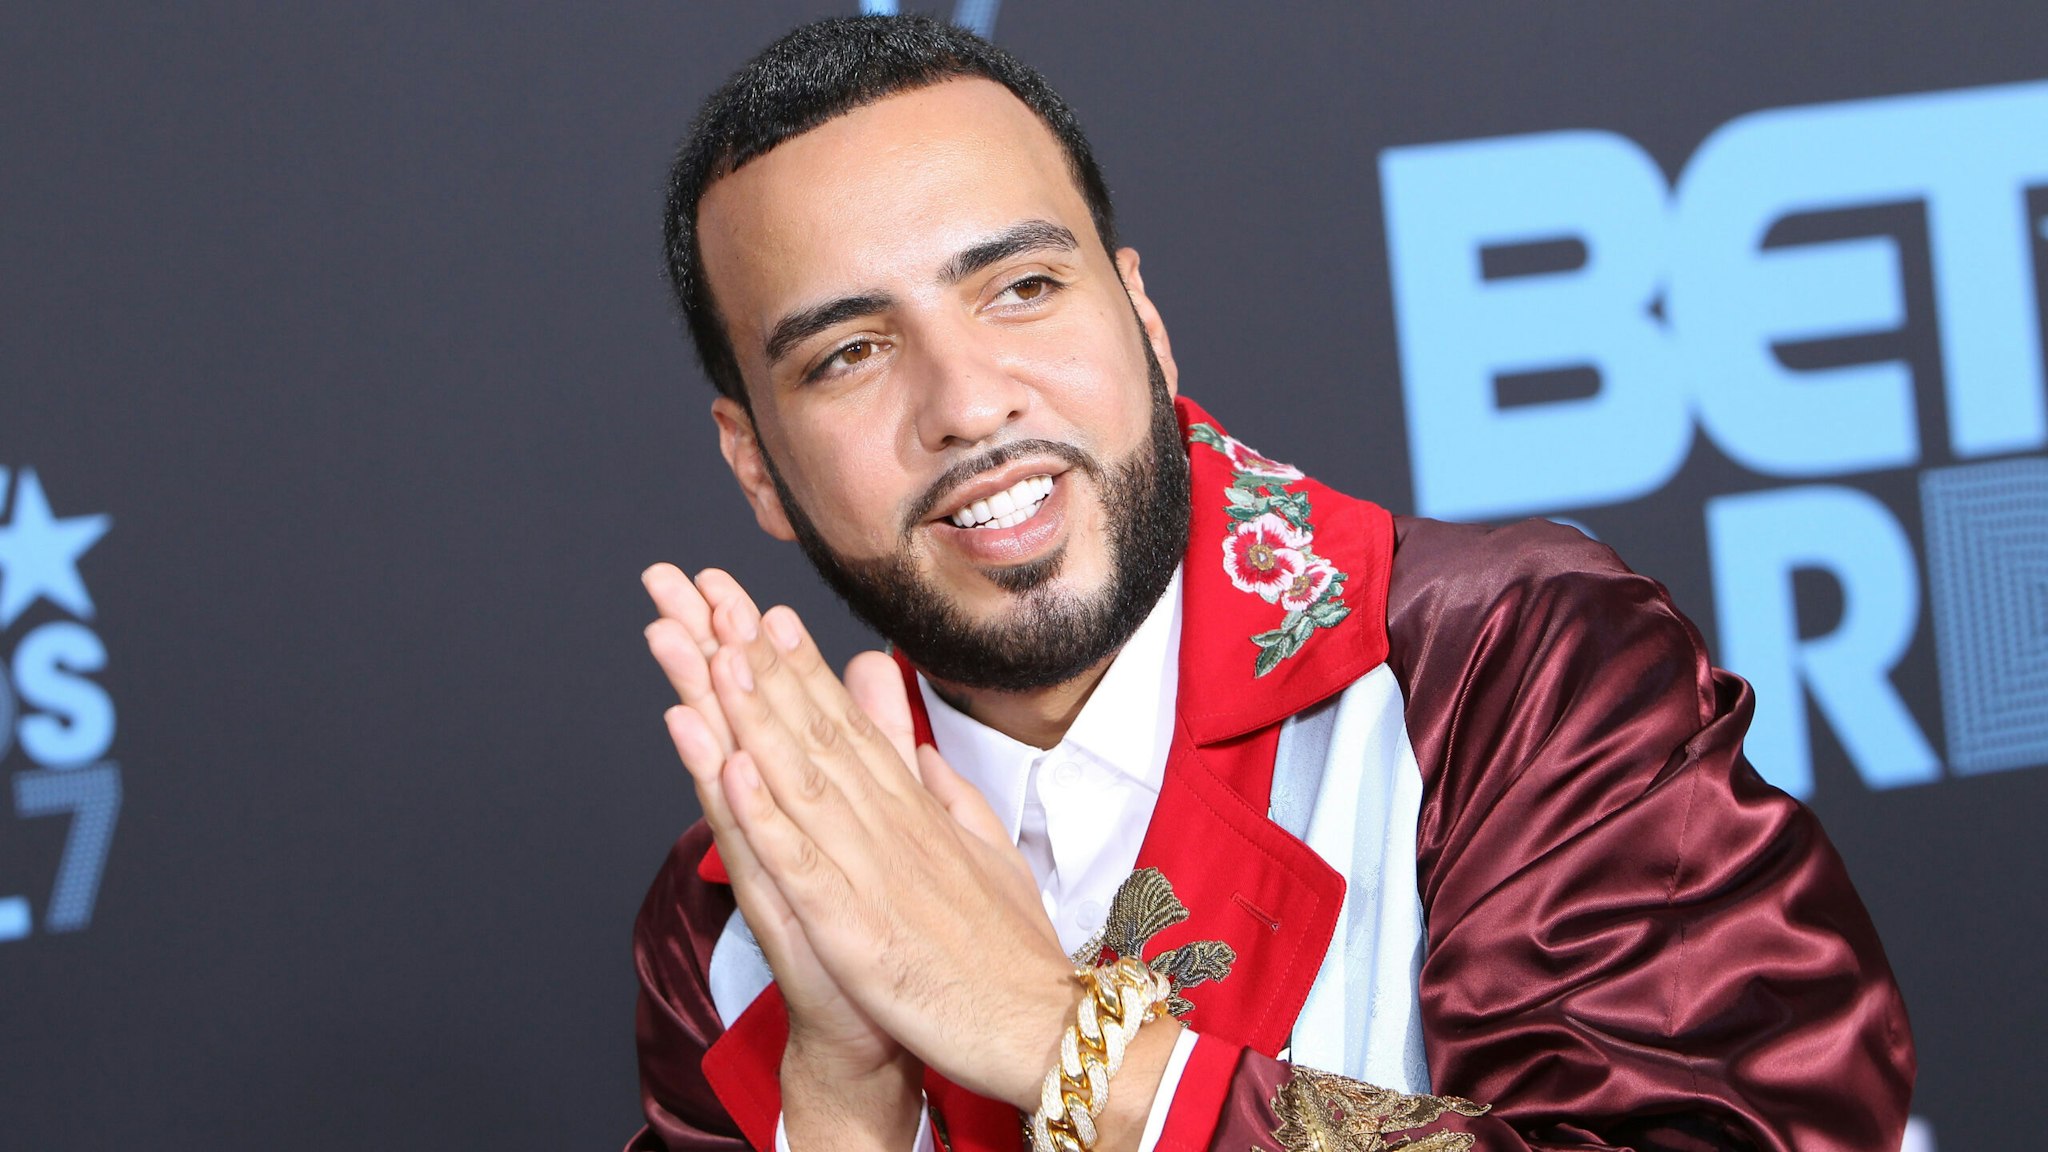 LOS ANGELES, CA - JUNE 25: Music artist French Montana arrives at the 2017 BET Awards at Microsoft Theater on June 25, 2017 in Los Angeles, California.